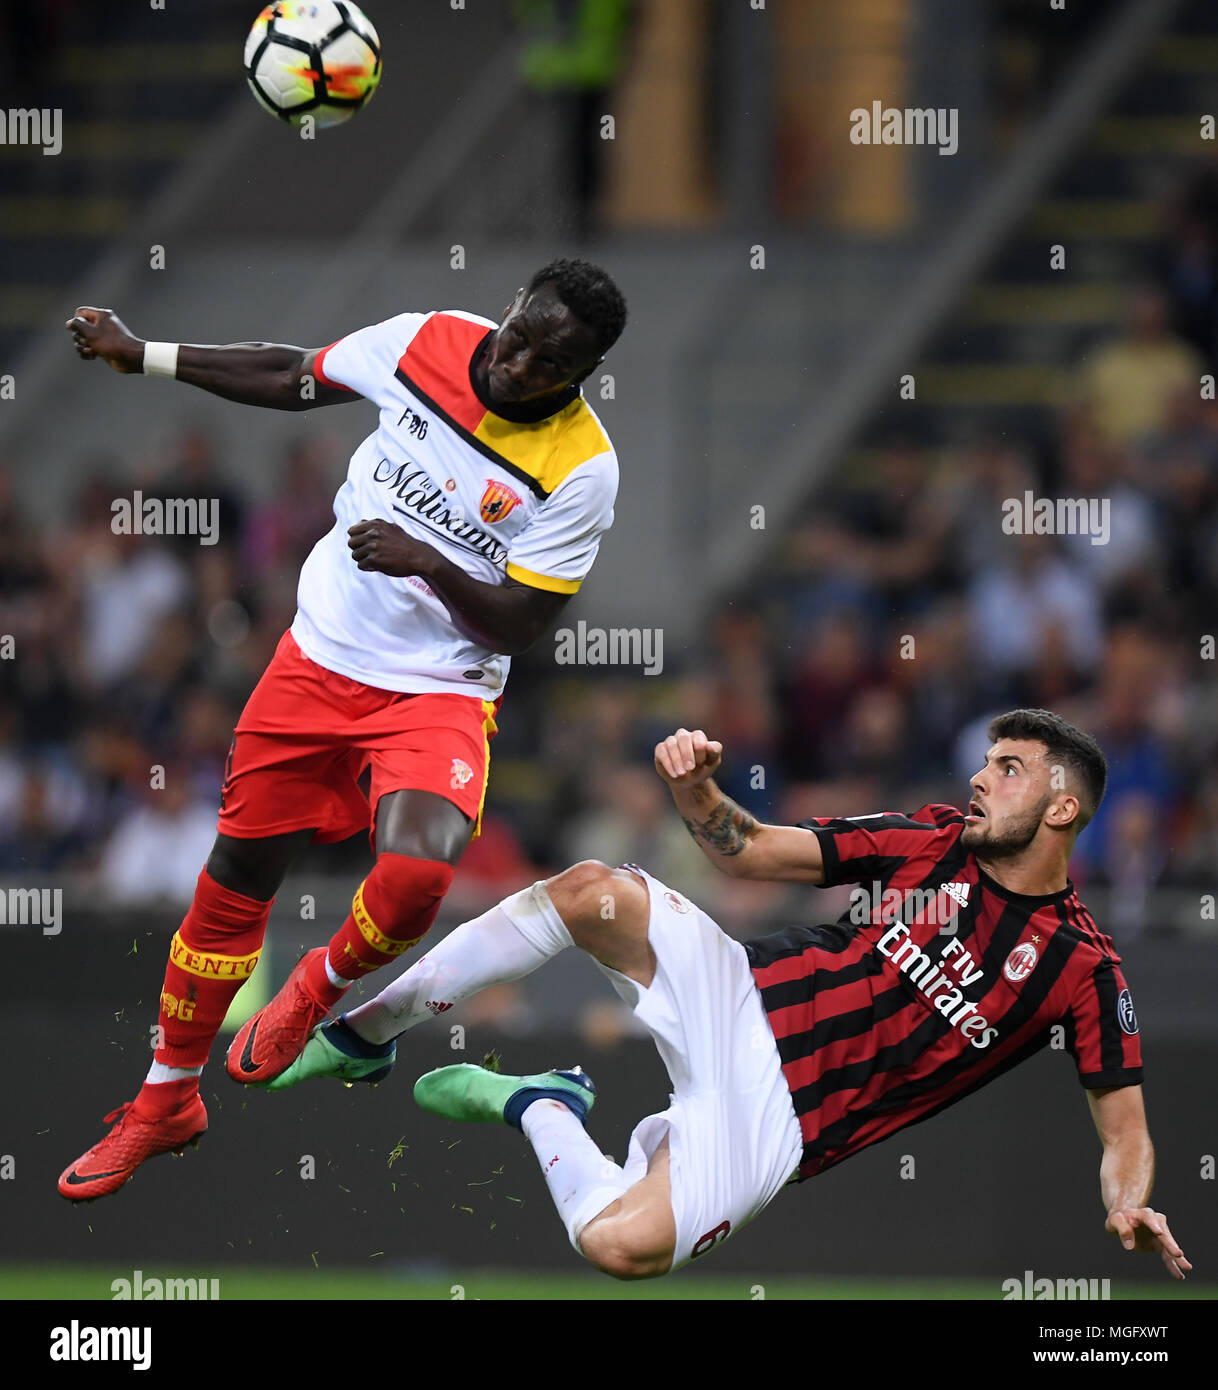 Beijing, Italy. 21st Apr, 2018. Benevento's Bacary Sagna (L) vies with AC Milan's Patrick Cutrone during the Serie A soccer match between AC Milan and Benevento in Milan, Italy, on April 21, 2018. Benevento won 1-0. Credit: Alberto Lingria/Xinhua/Alamy Live News Stock Photo